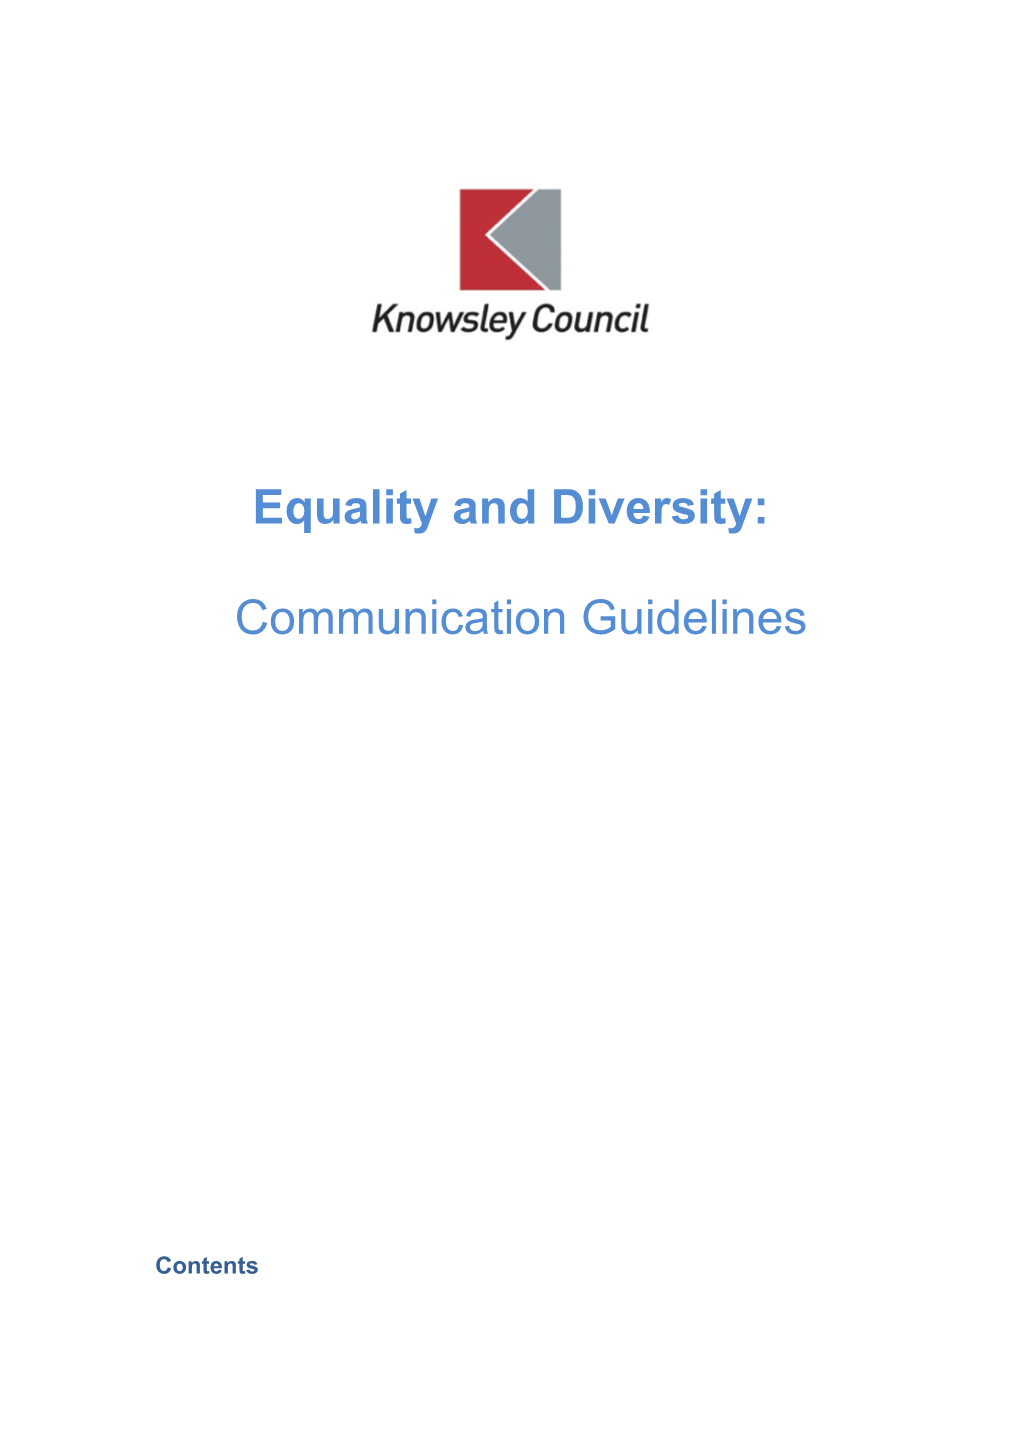 Equality and Diversity Considerations